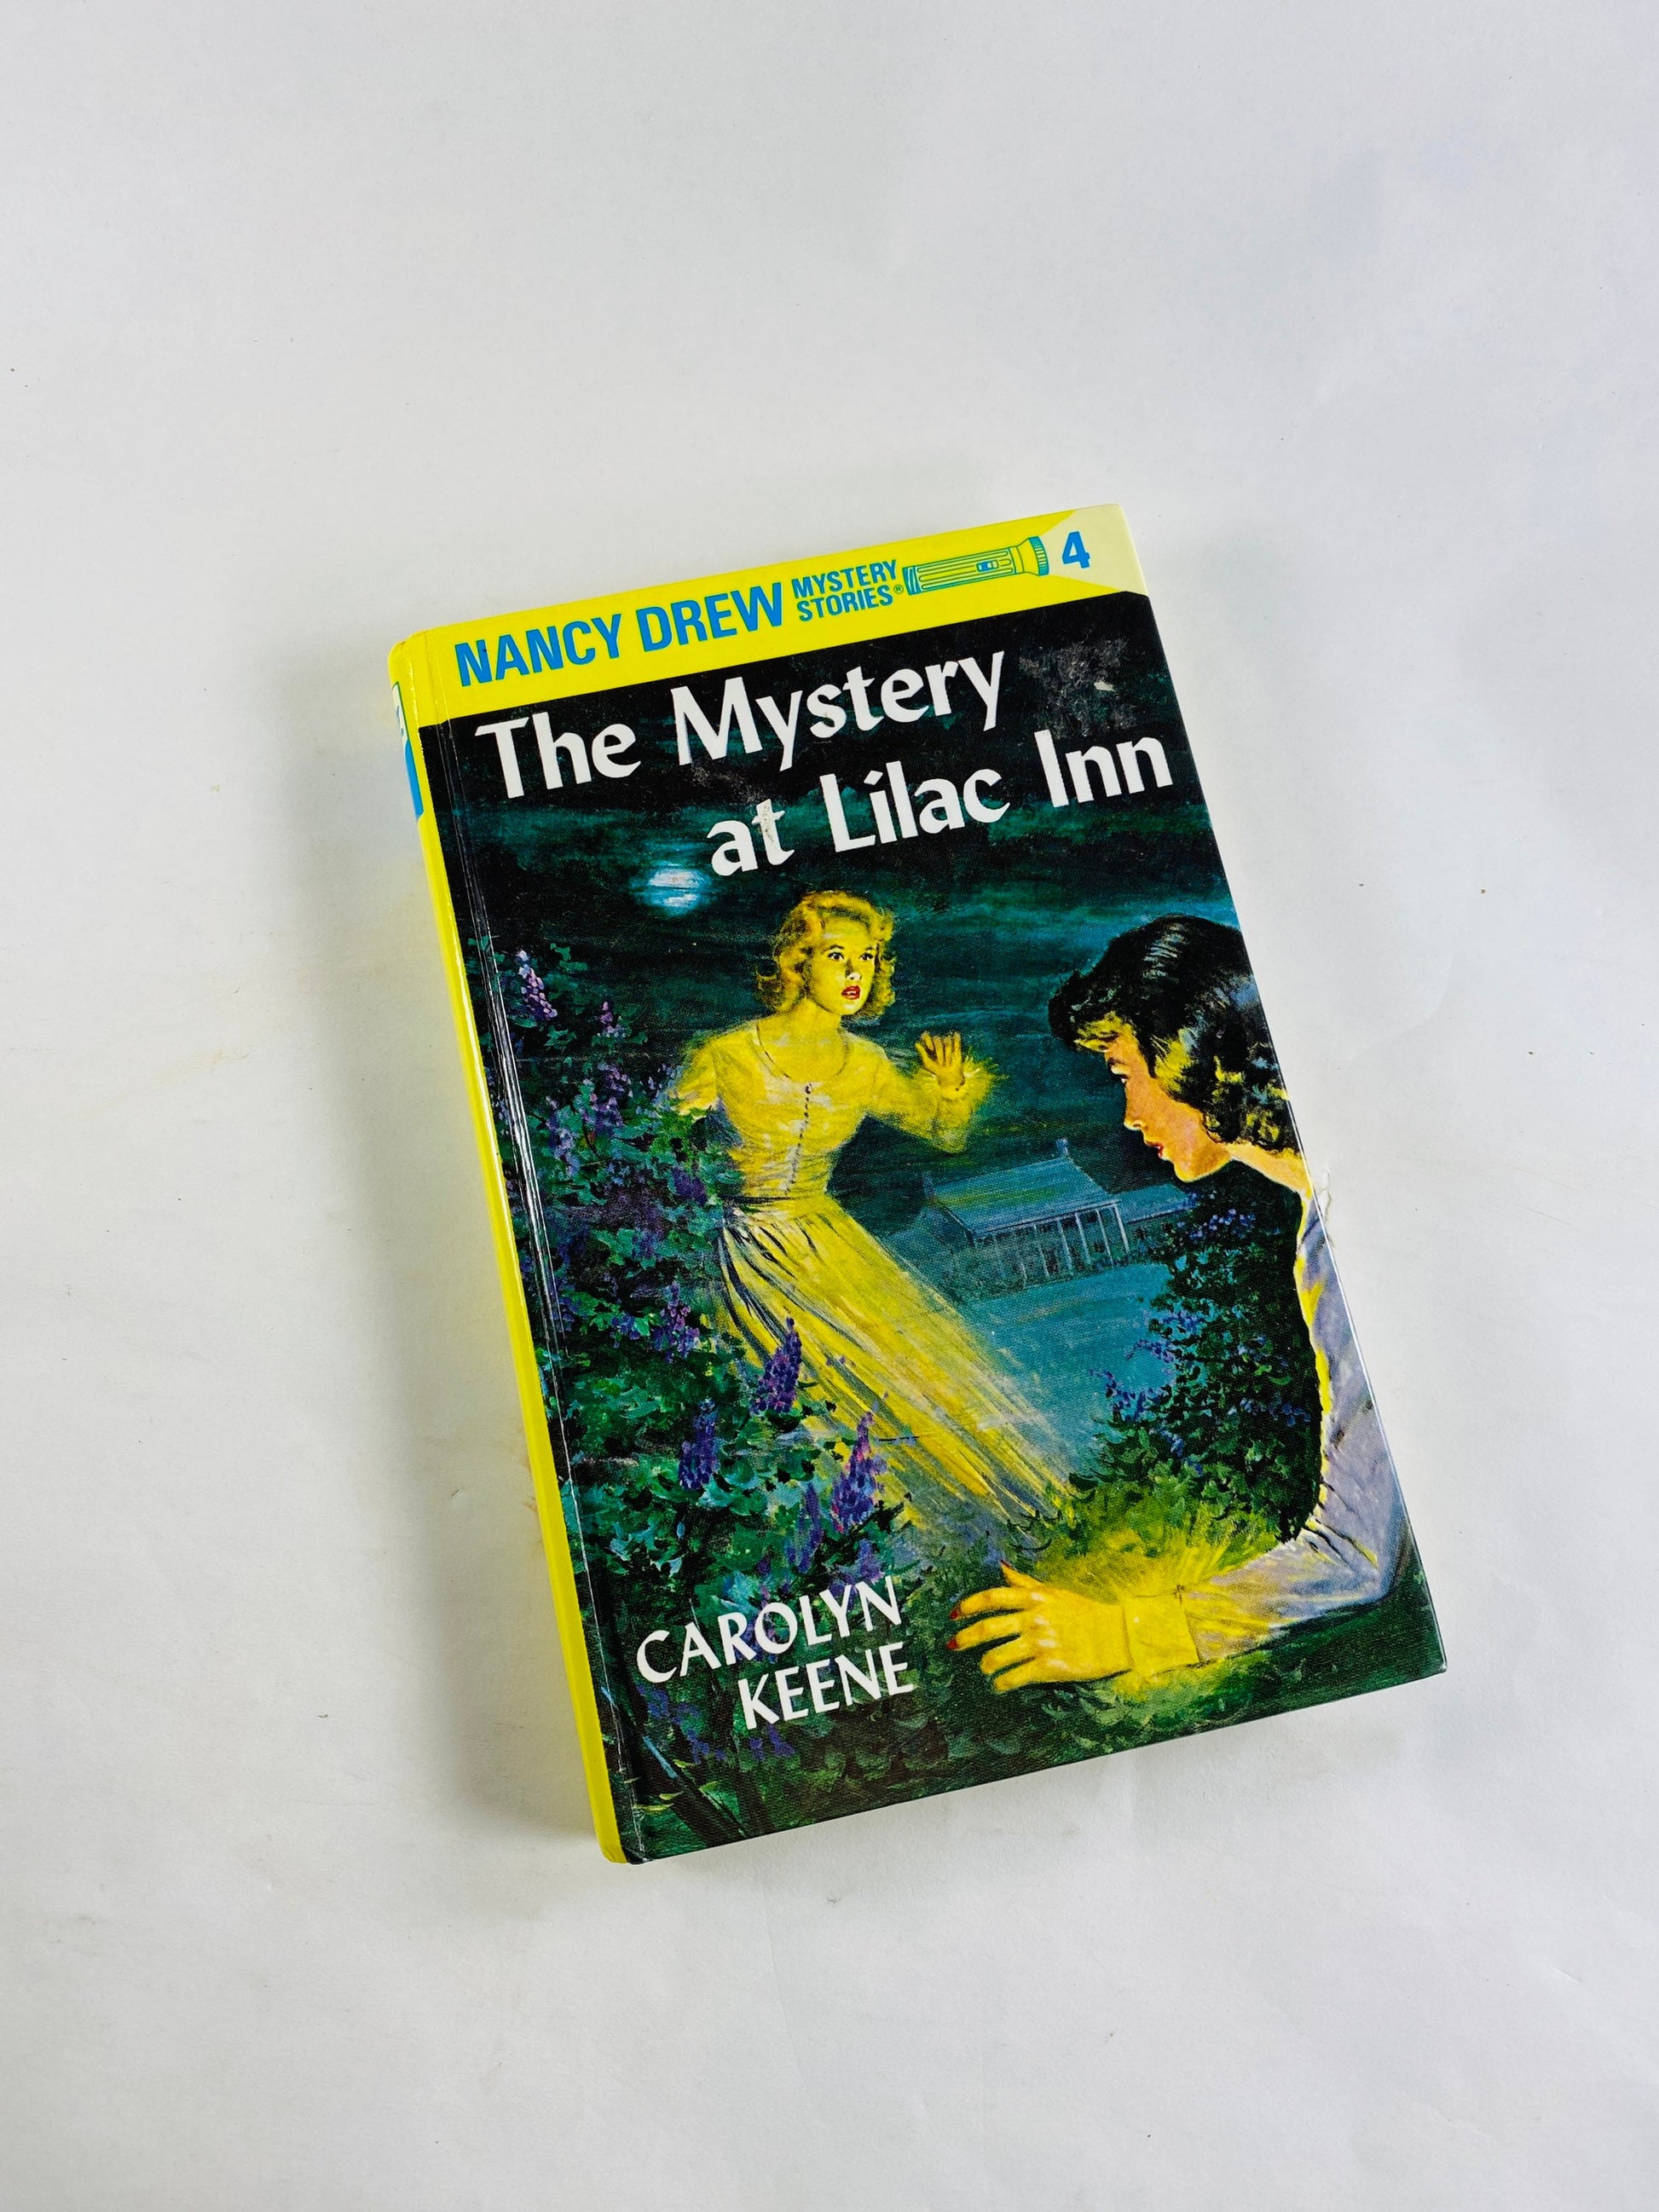 Nancy Drew Mystery Stories vintage books in good condition by Carolyn Keene. Glossy yellow spine hardcovers. home reading elementary middle